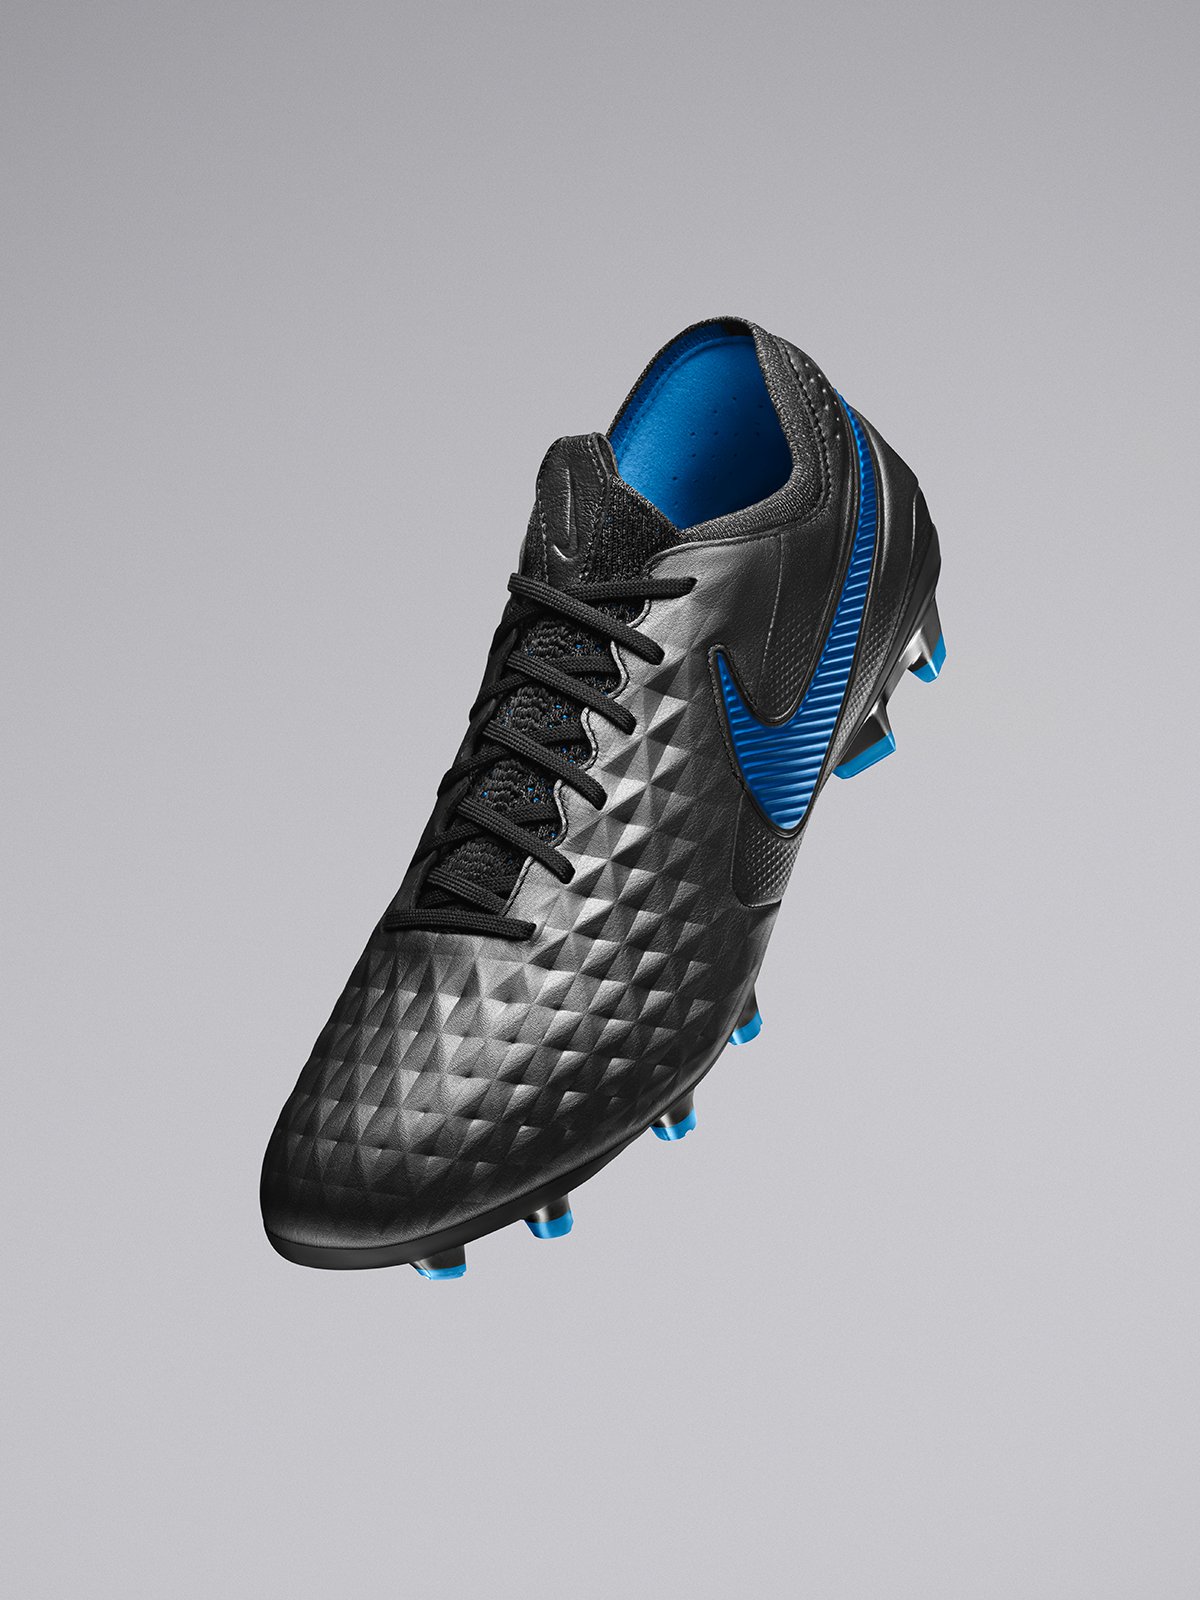 1SoccerStore.com on Twitter: "Built for Leaders. Introducing the new Nike Tiempo Legend Available now https://t.co/QLGkgGeyi7! https://t.co/TQBO1PMlno" / Twitter